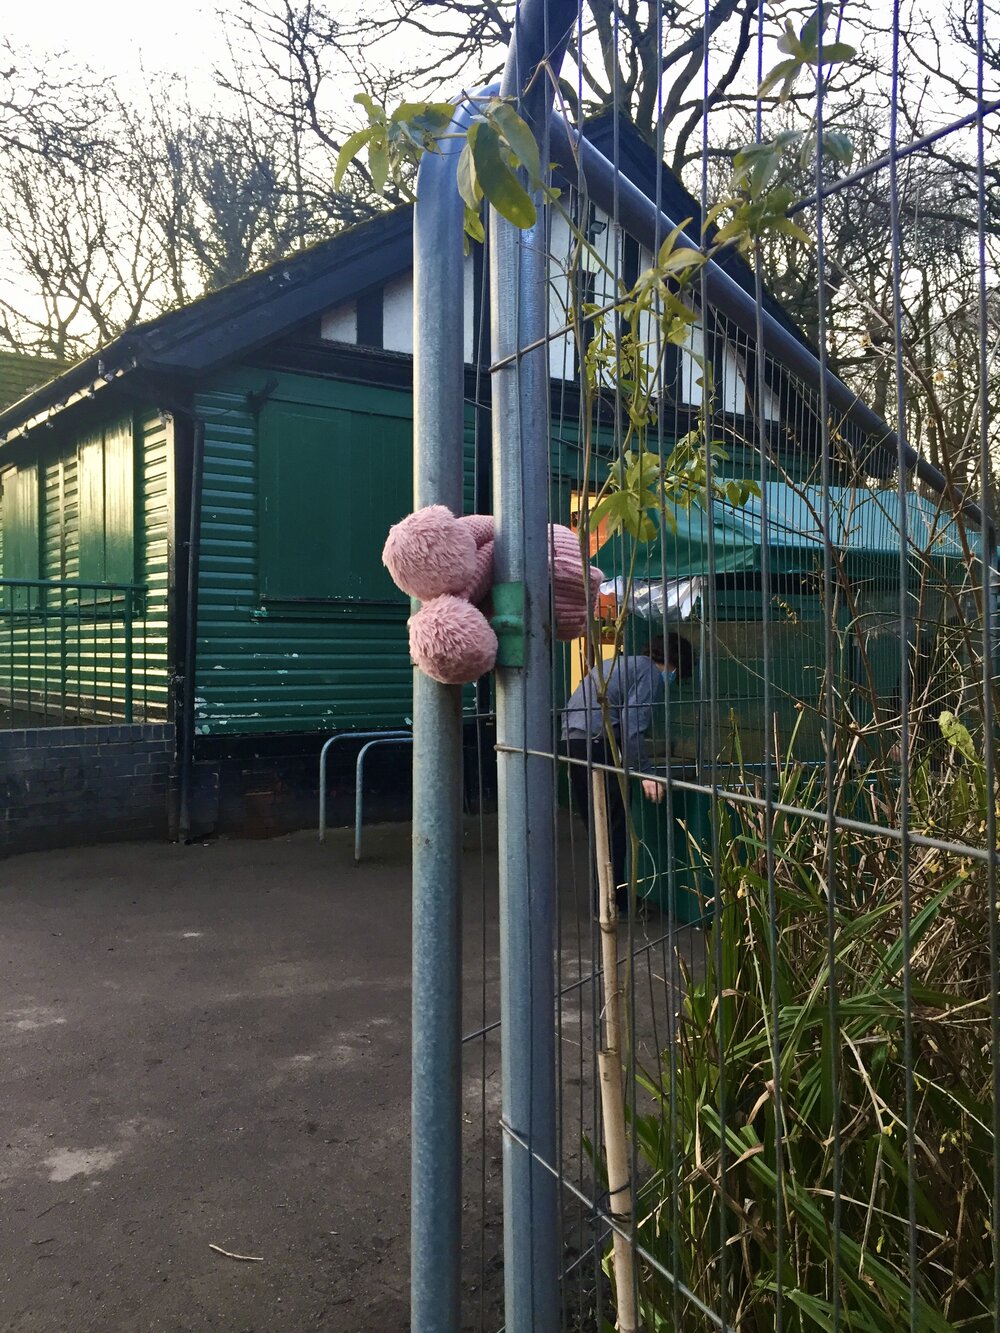  I think this is a hat. It’s woollen, pink, has two pink bobbles, and is shoved between two pieces of security railing. 